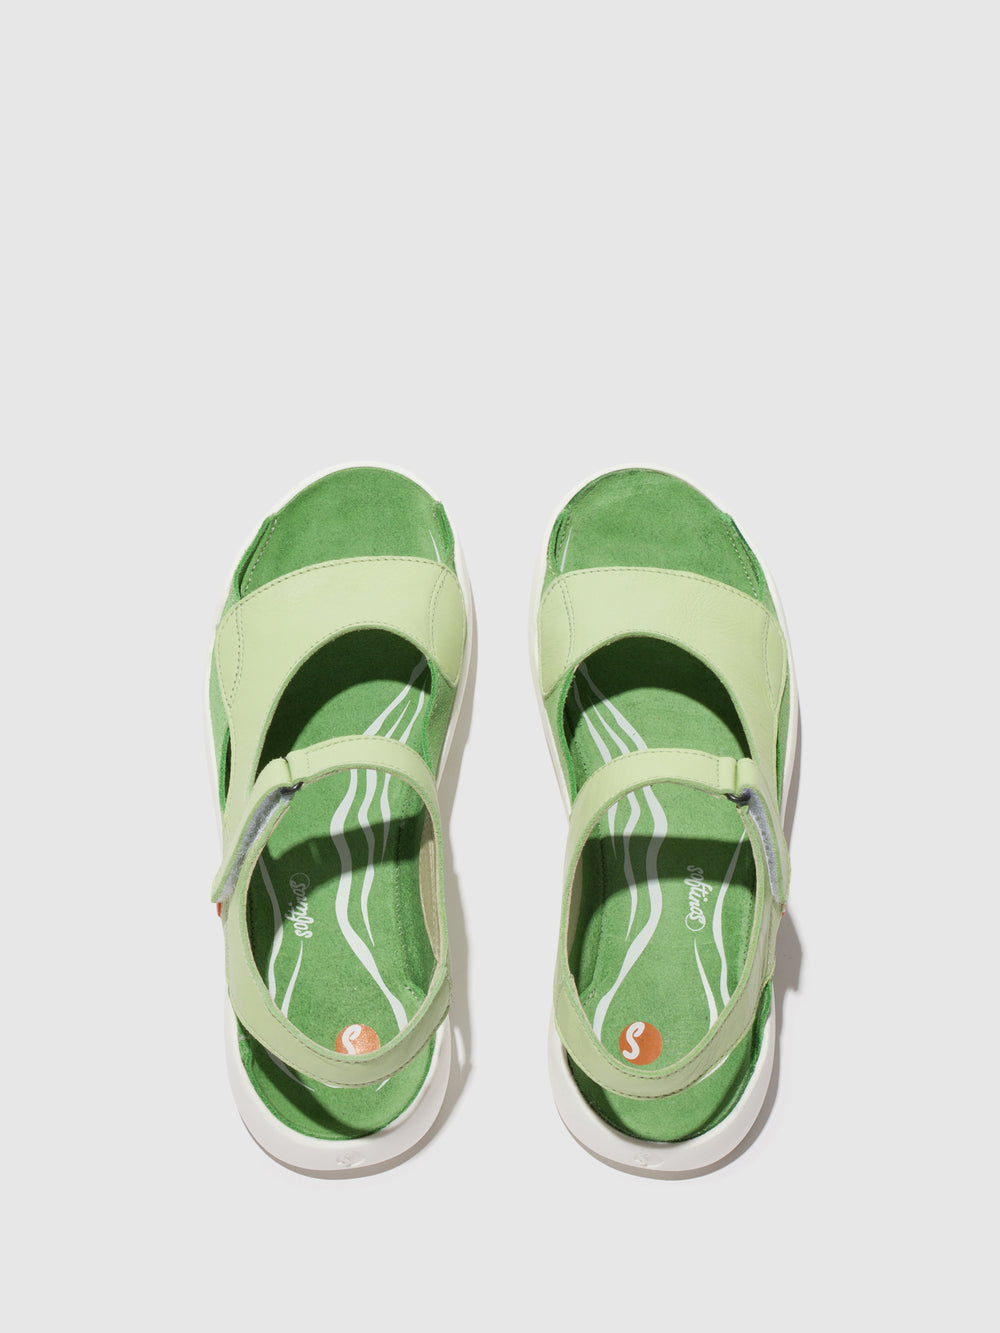 Softinos Weal712 Light Green Leather Sandals with Velcro.